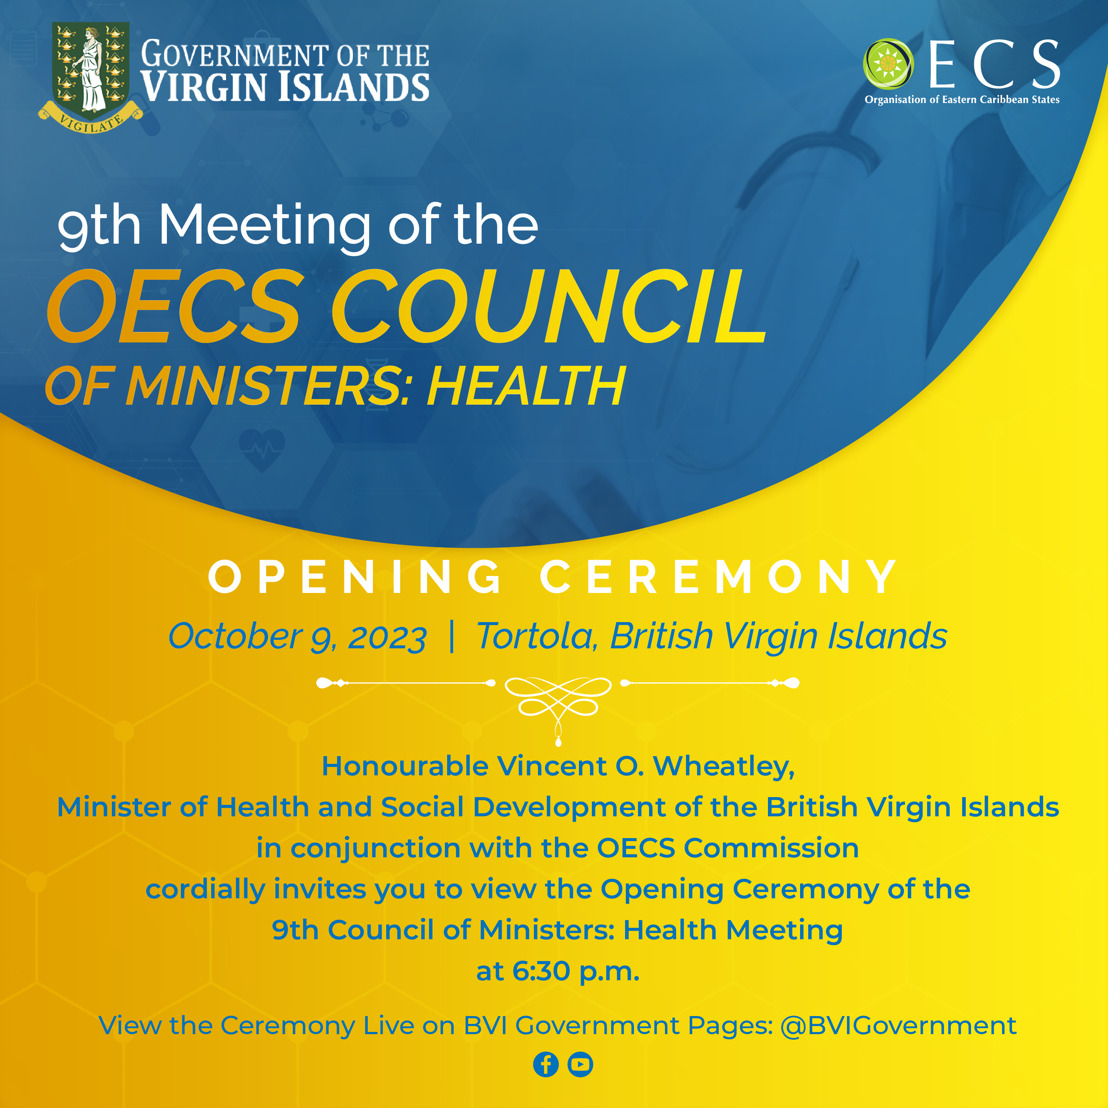 [Media Invitation] Opening Ceremony and Press Briefing of the 9th OECS Council of Ministers: Health